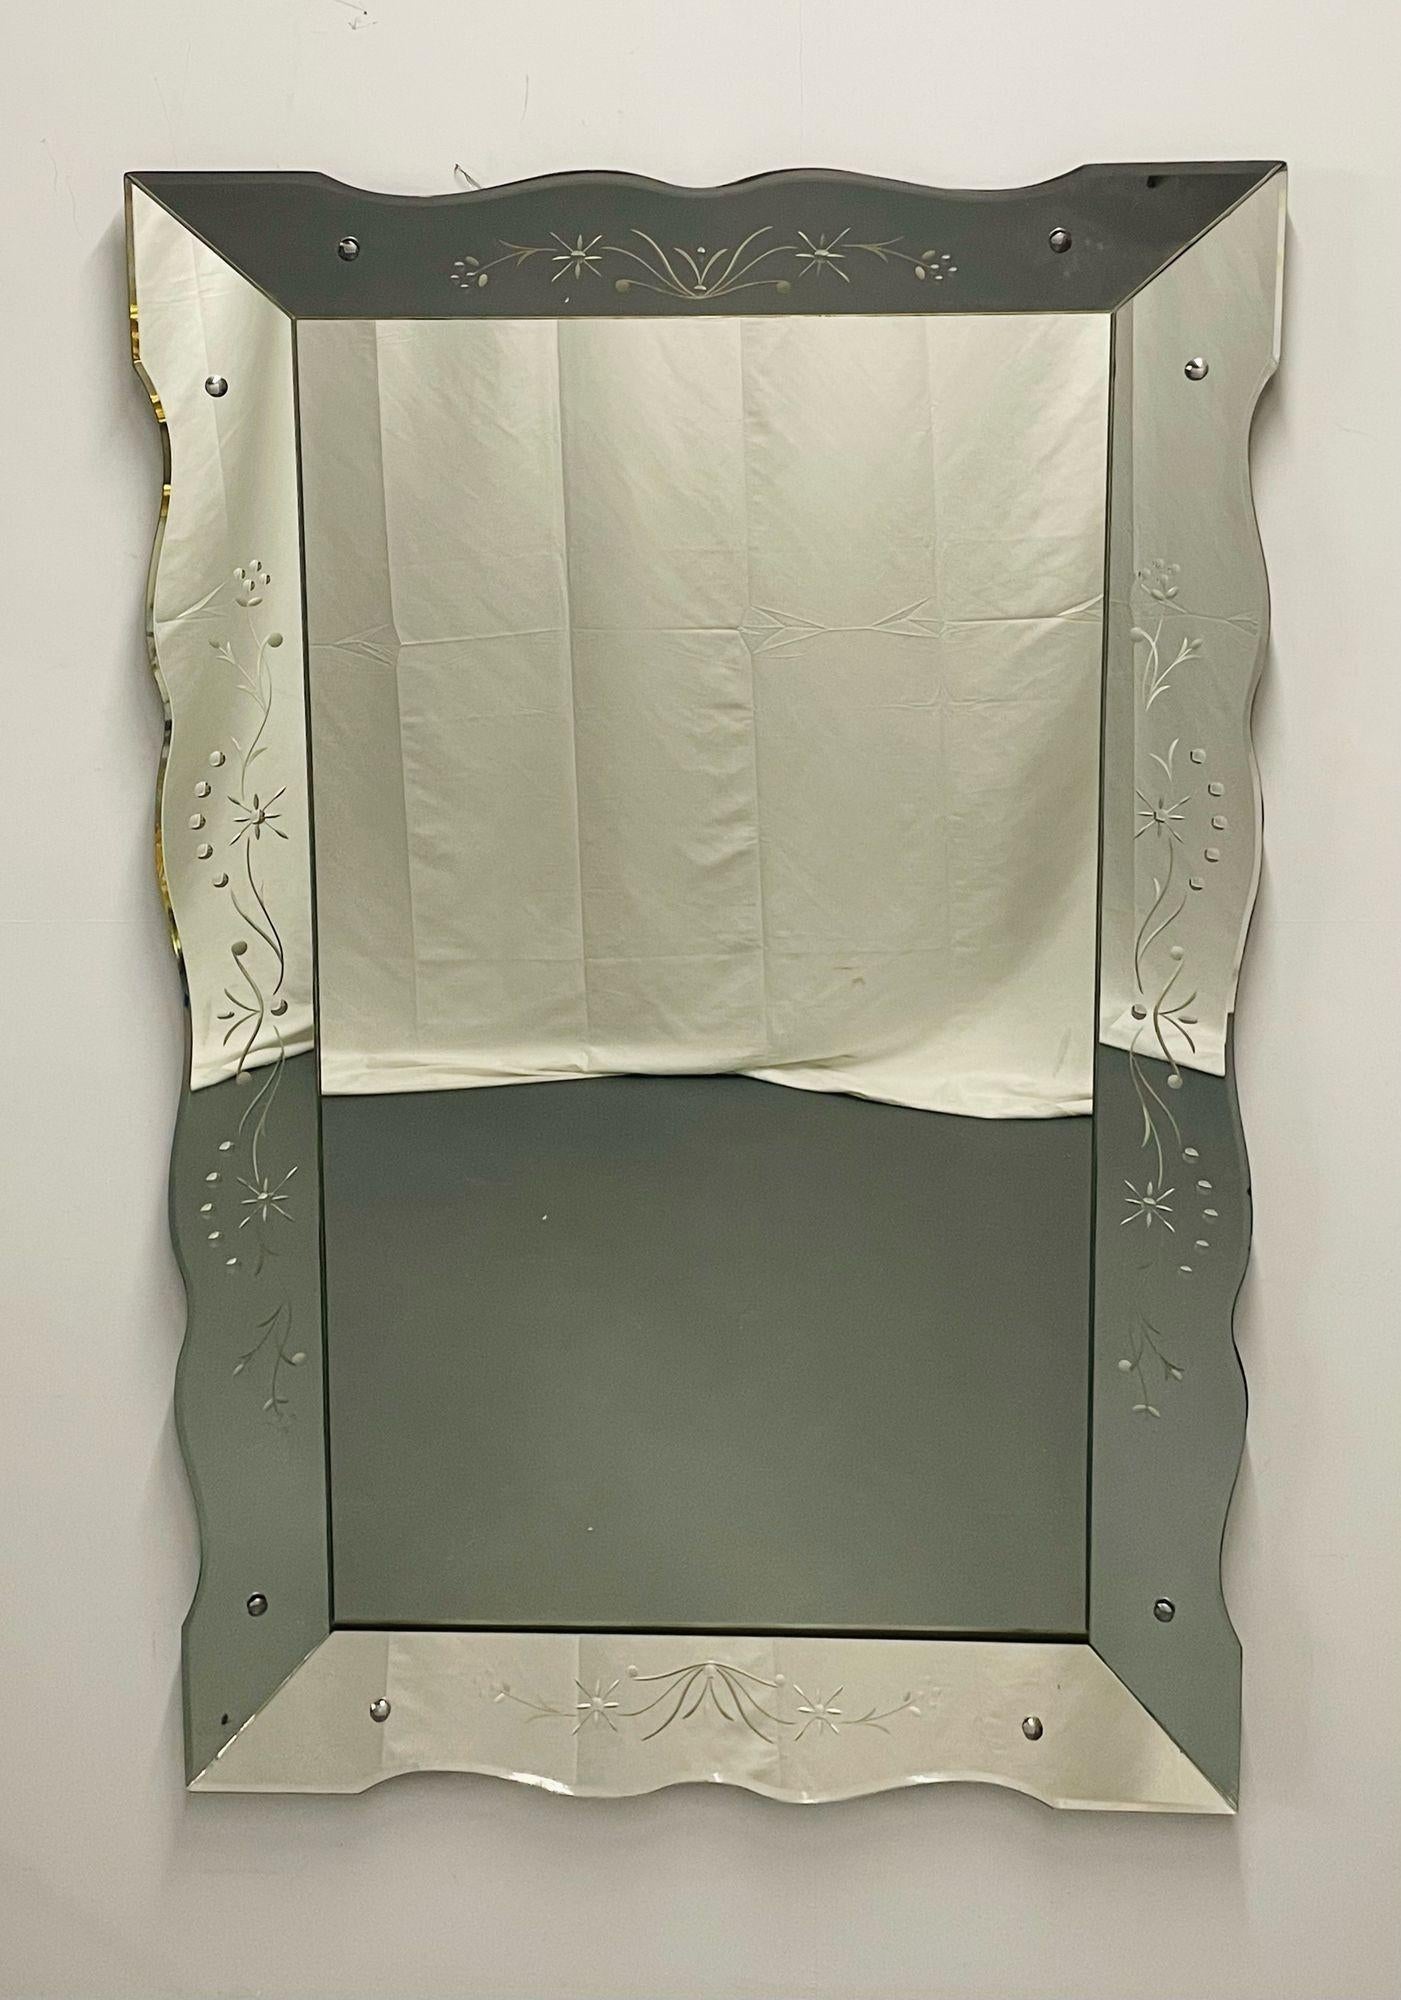 Art Deco Venetian Wall / Console Mirror, Etched Glass Floral Motif
 
A stunning Art Deco Wall or Over the Mantle Mirror having shadow box etched floral glass sides framing a center clean mirror. The mirror supported with chrome pegs on wooden